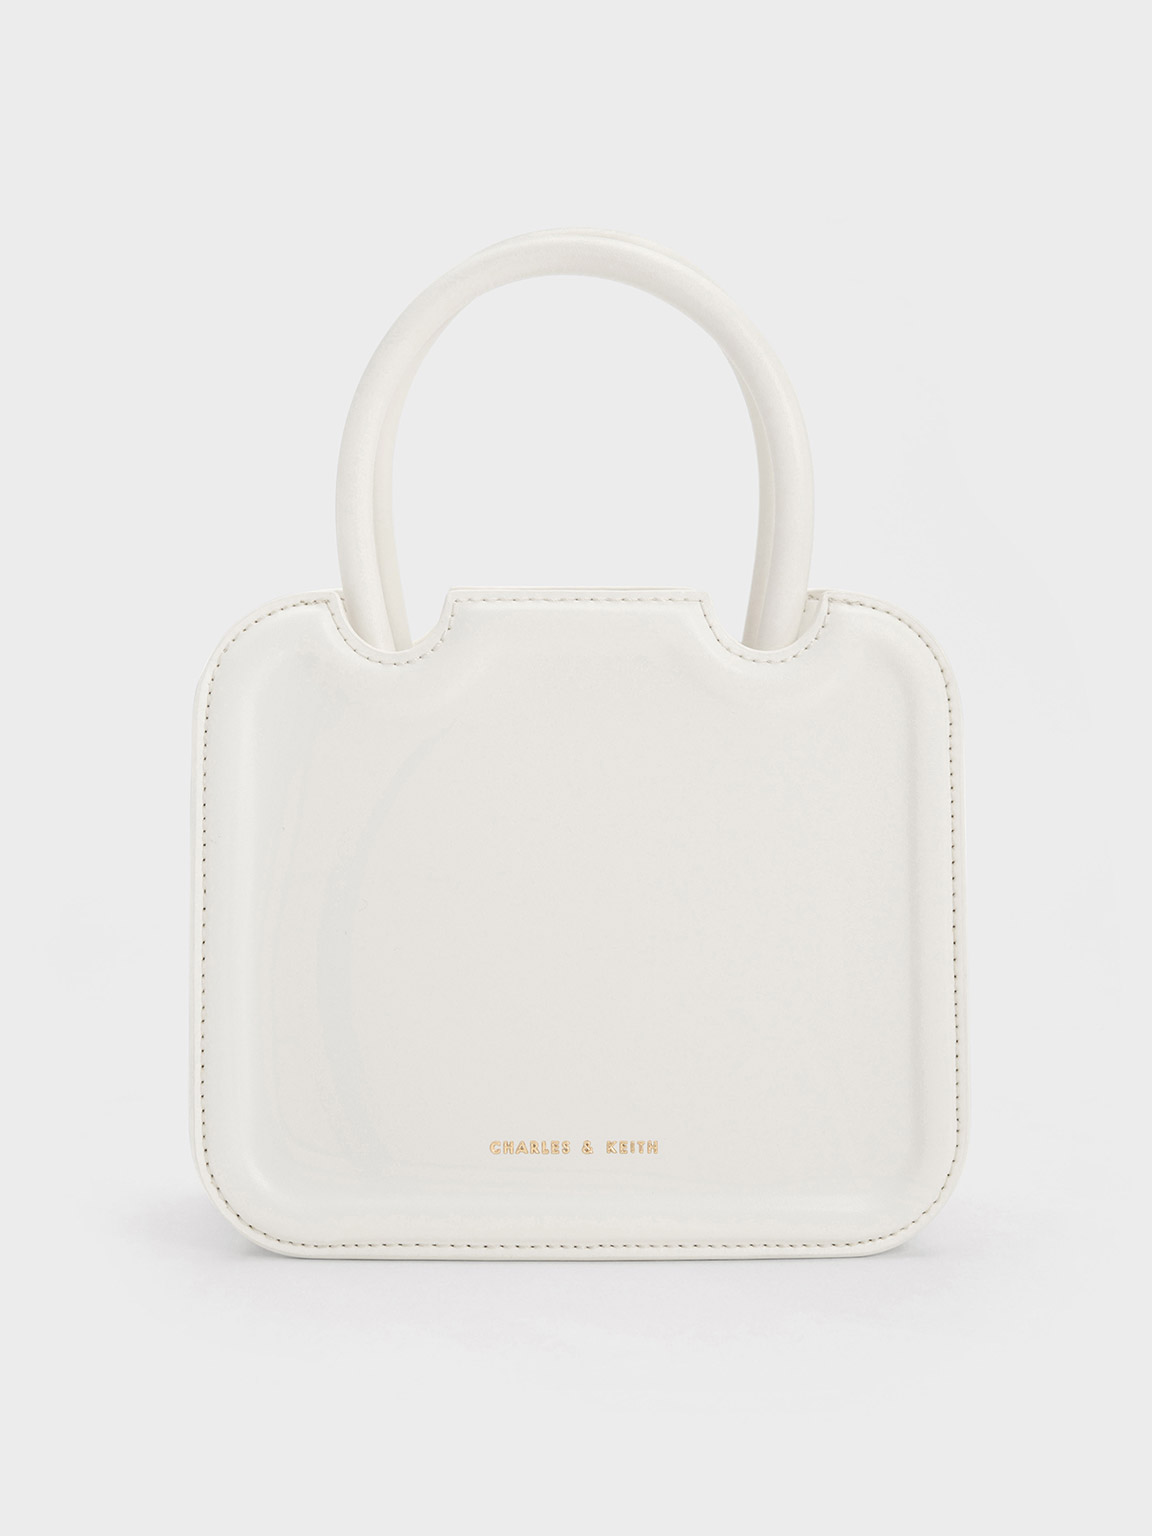 Charles & Keith Perline Sculptural Tote Bag In White